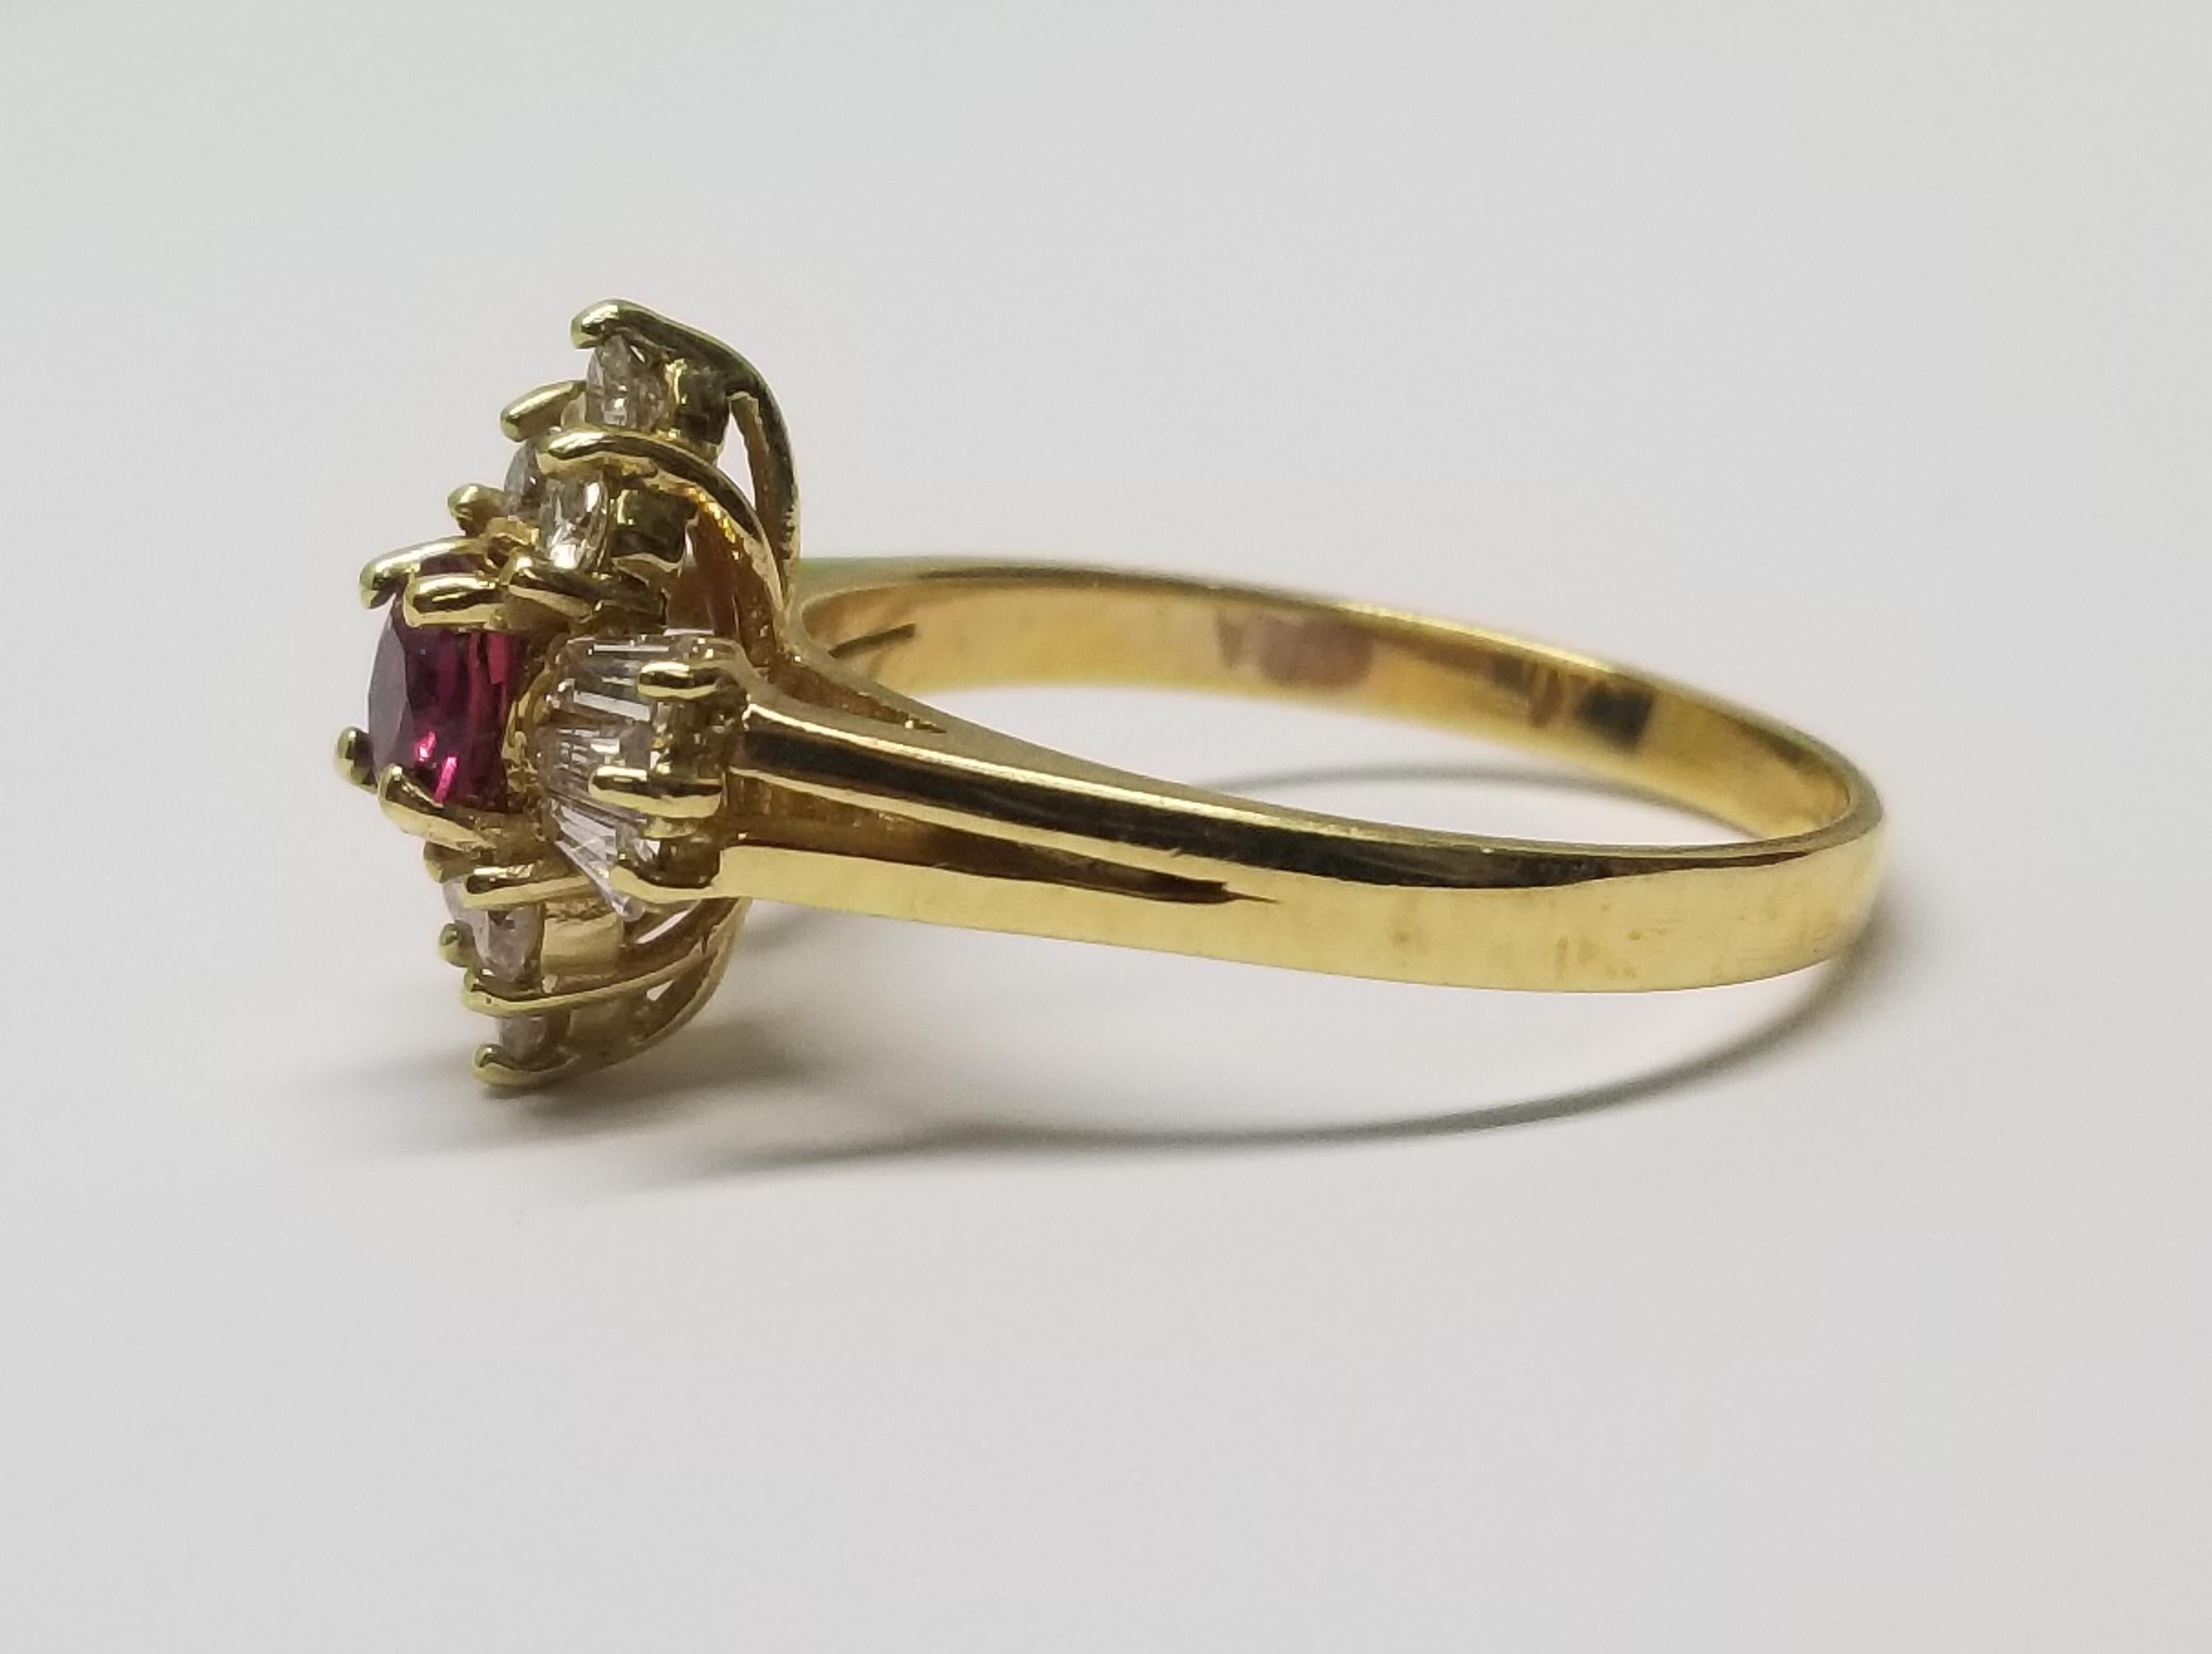 14k yellow gold ruby and diamond ring, containing 1 round ruby of gem quality weighing .36pts. and 6 baguette cut diamonds weighing .22pts. and 6 round full cut diamonds weighing .20pts. all diamonds are of very fine quality.  This ring is a size